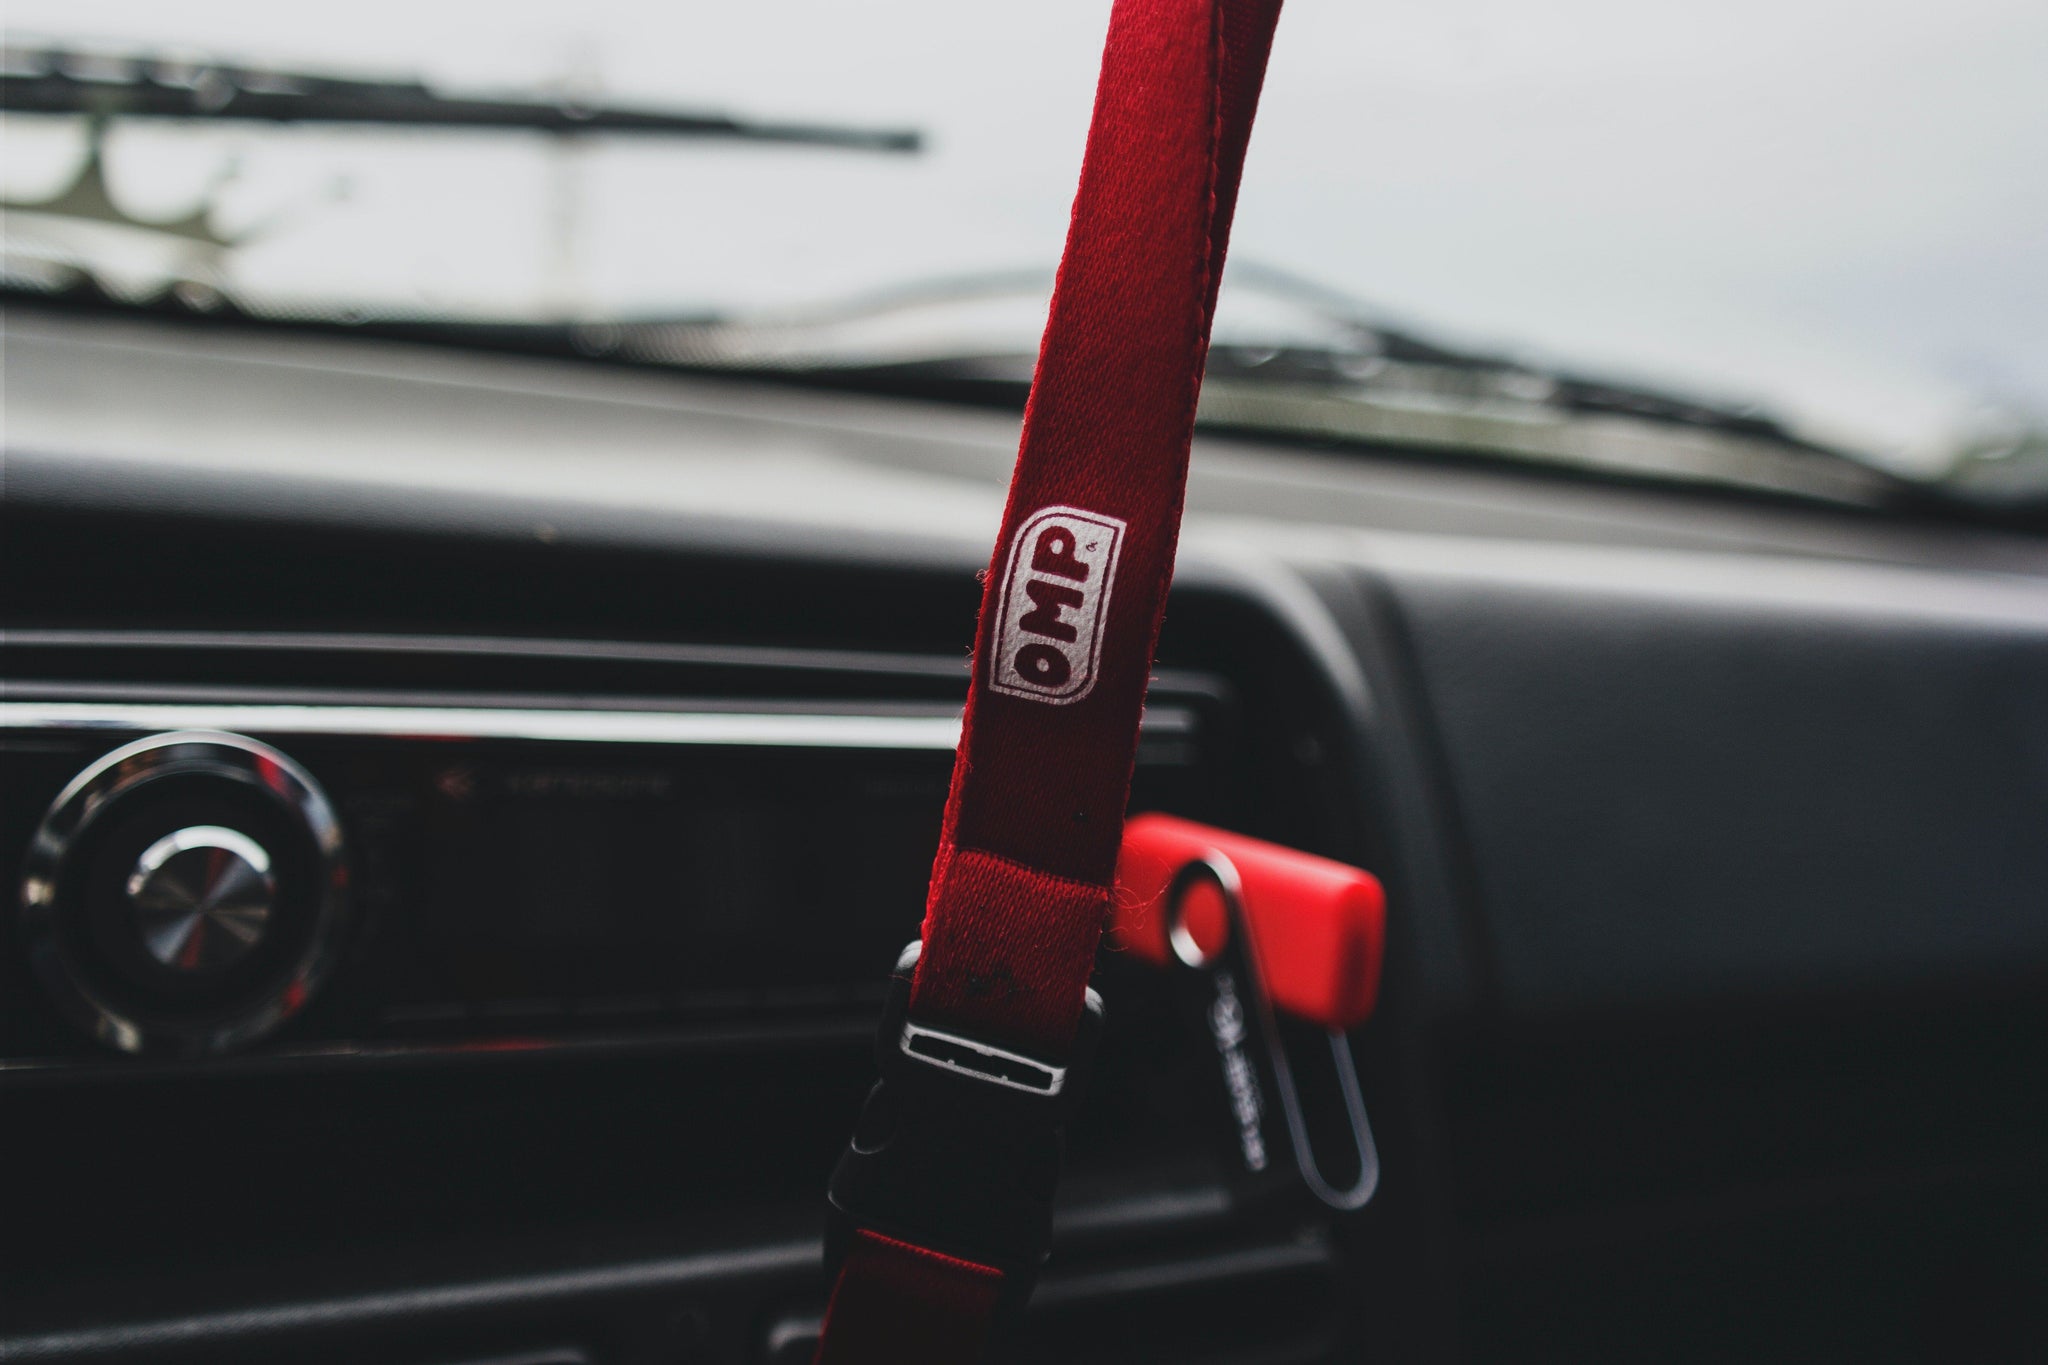 Custom Badges for Lanyards: Adding Identity and Style to Your Accessories